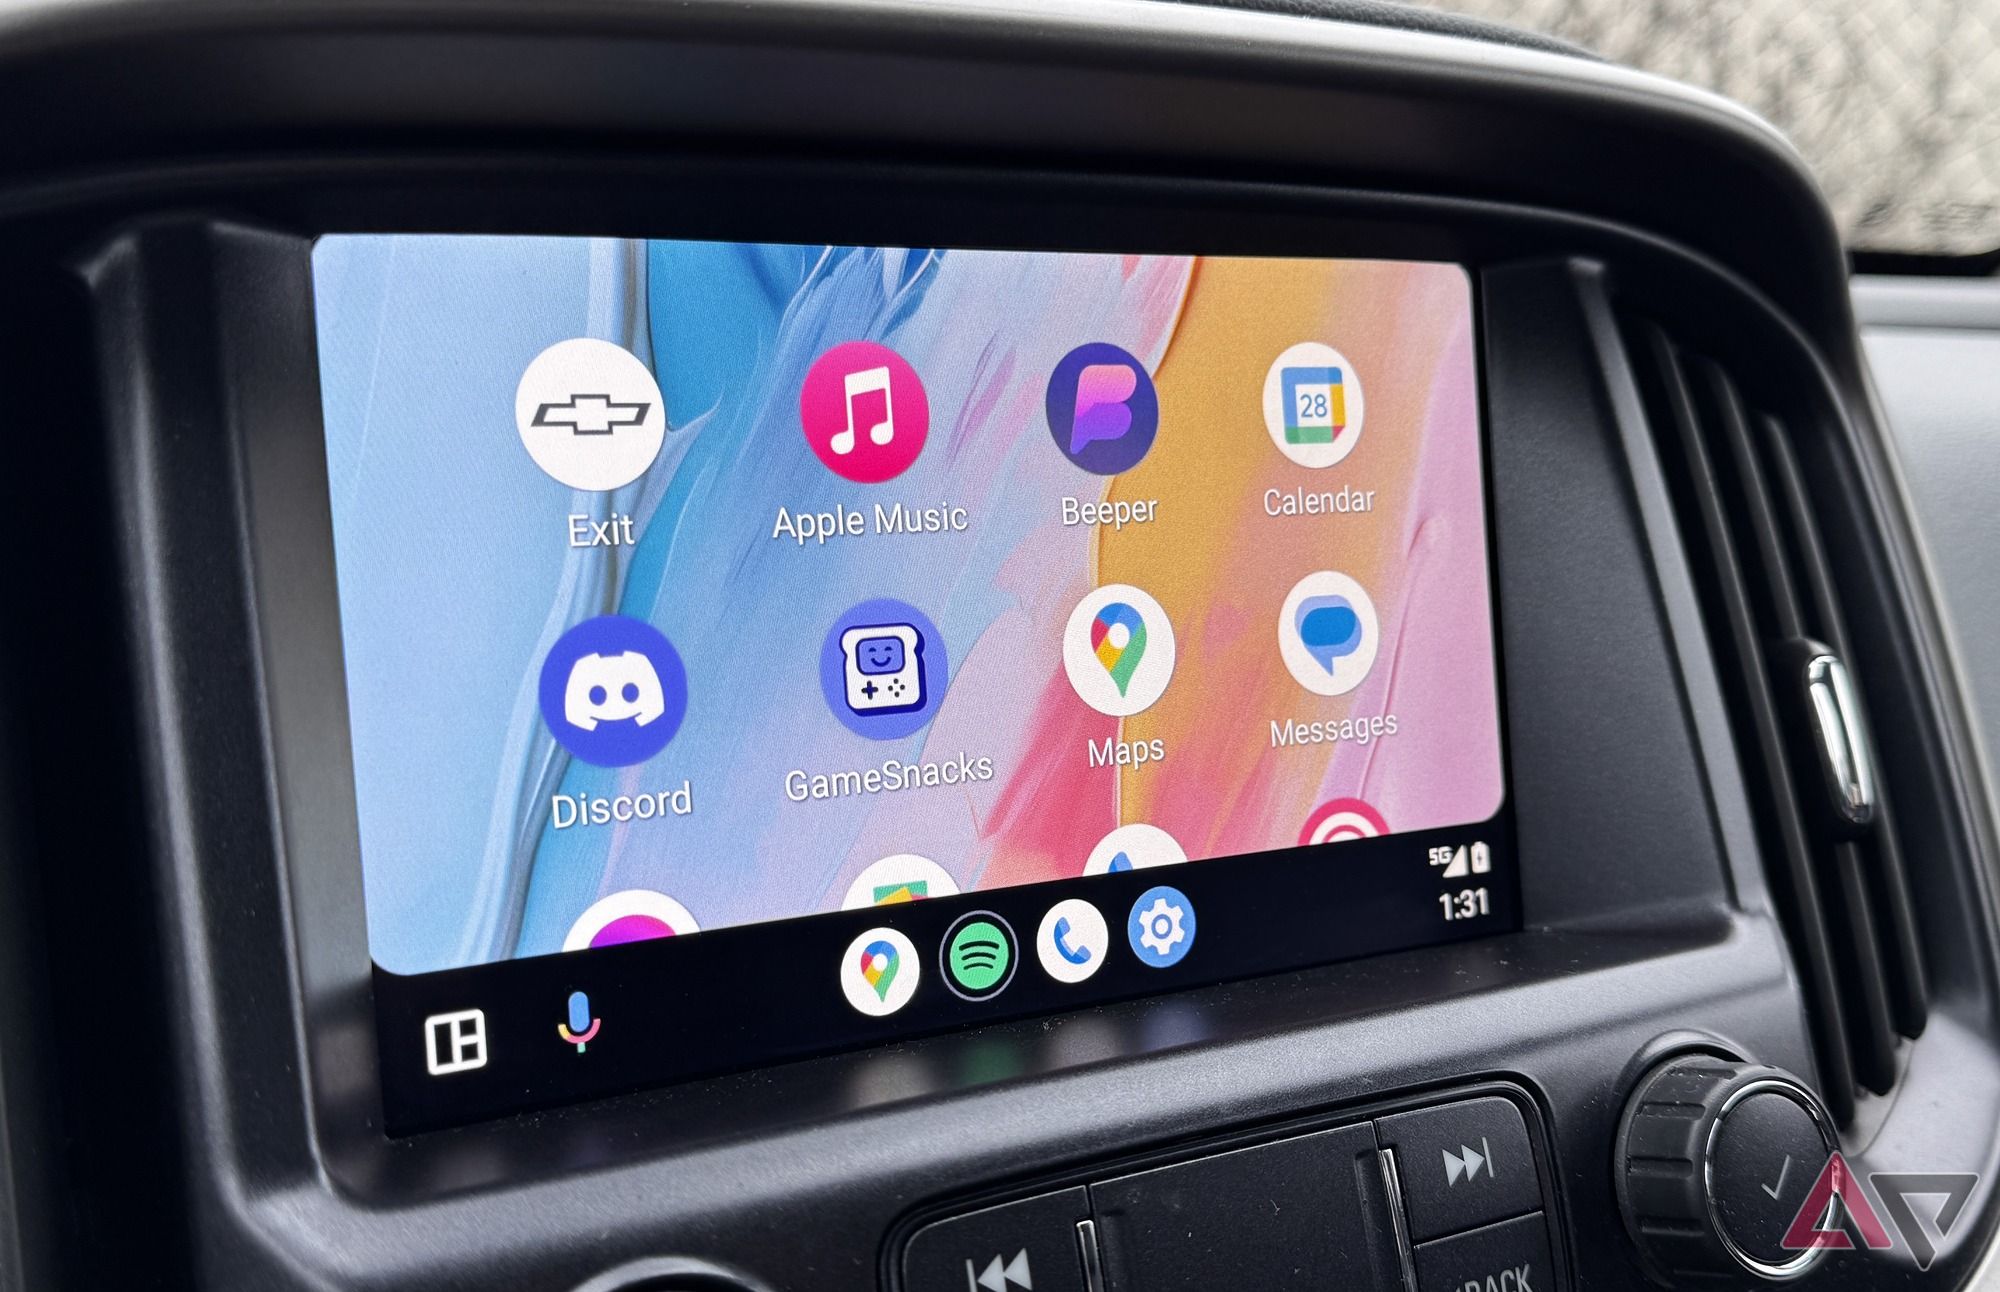 Android Auto introduces wallpaper borrowing feature, but compatibility varies